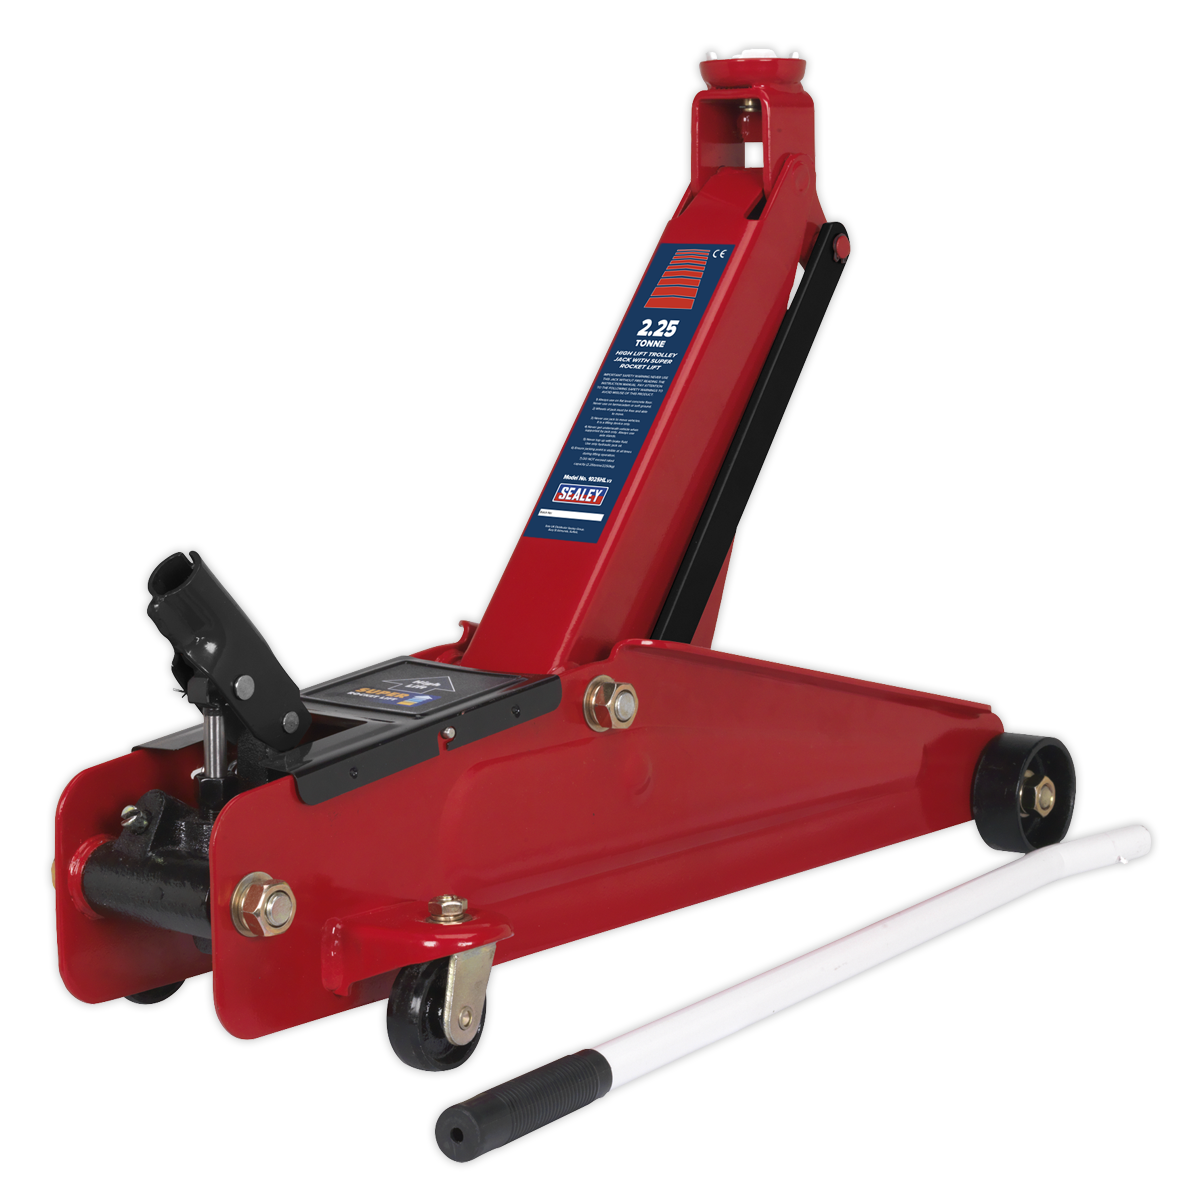 2 tonne High Lift Hydraulic Trolley Jack-Portable Garage Jacks-with Super Rocket Lift and Carry Bag-Car 4x4 Van SUV Low Entry 